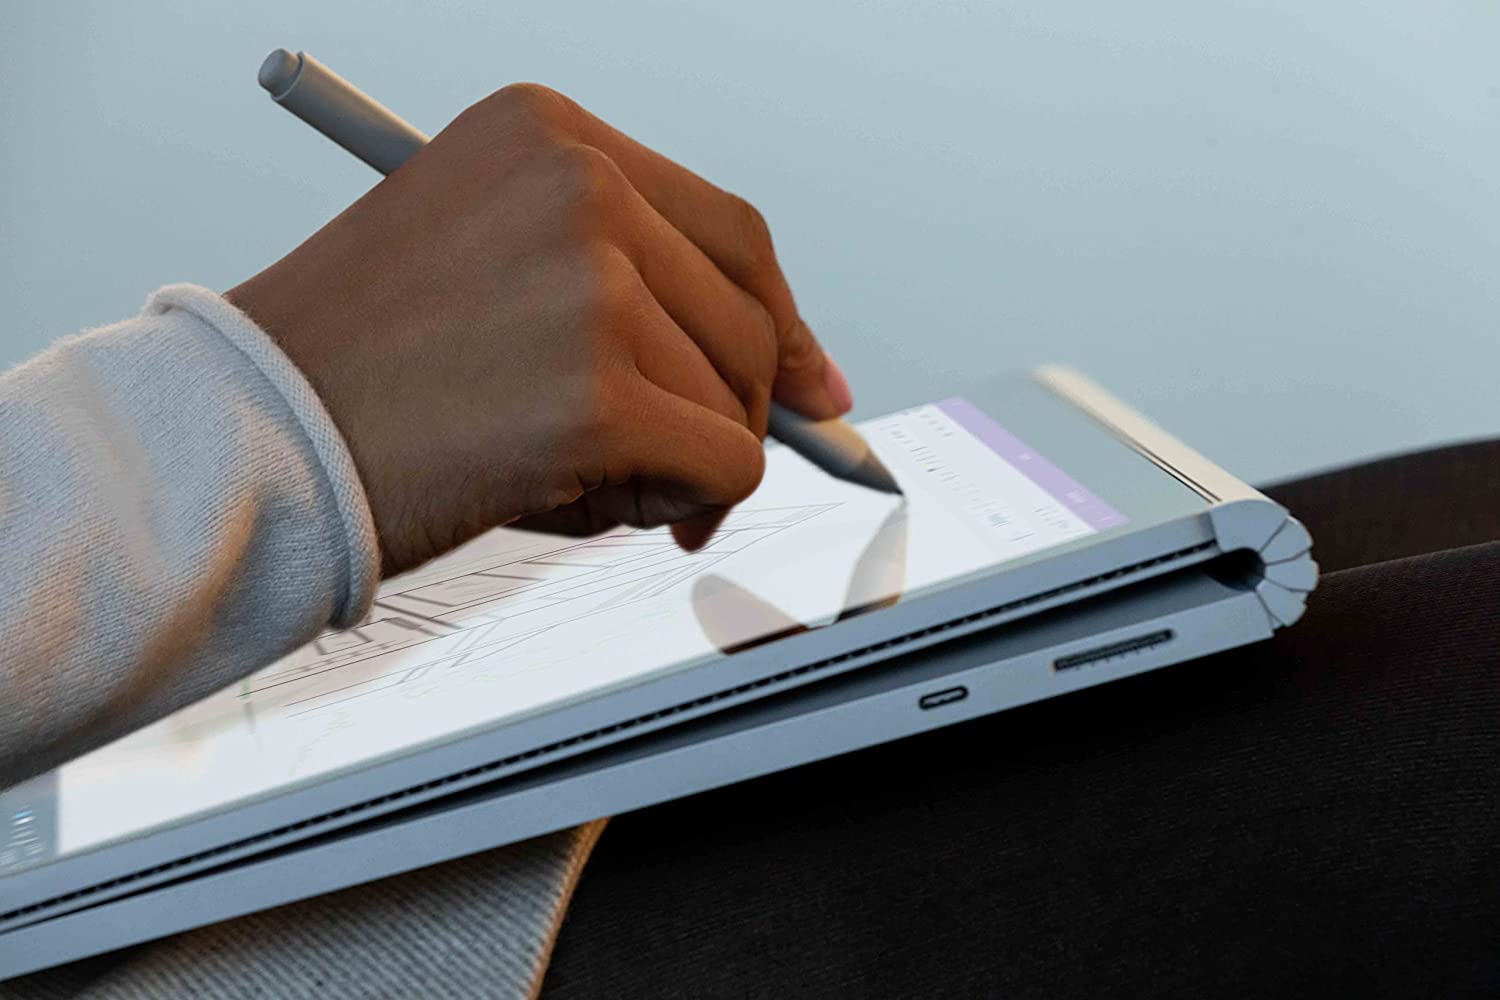 Microsoft Surface Pen - Platinum in use